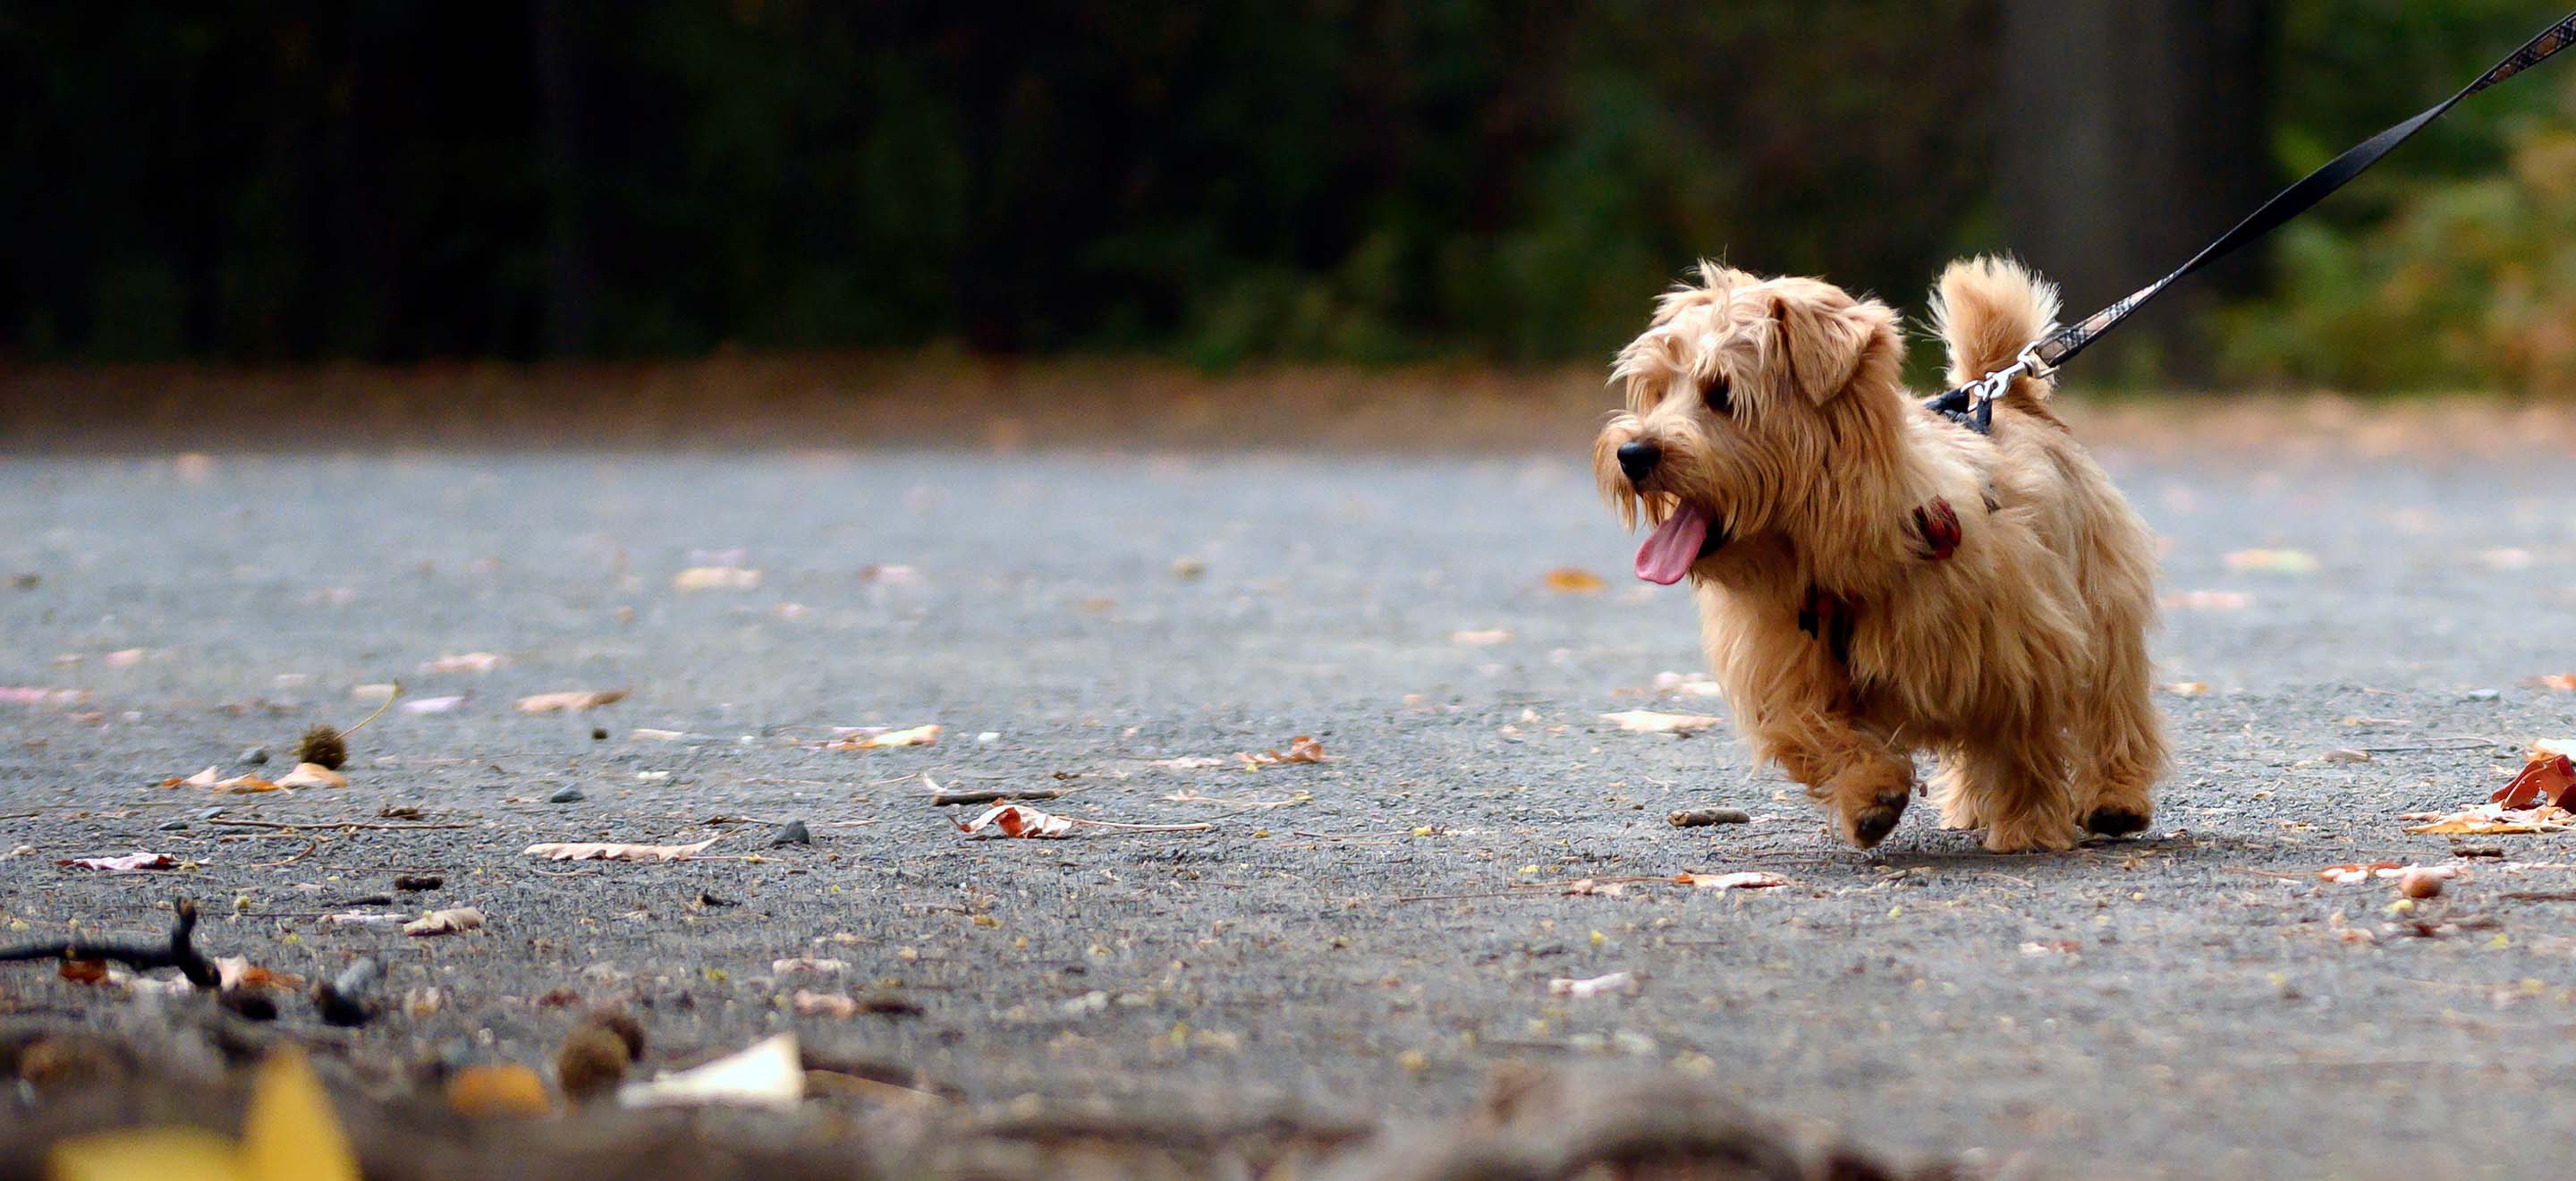 A Norfolk Terrier dog going for a walk in autumn image